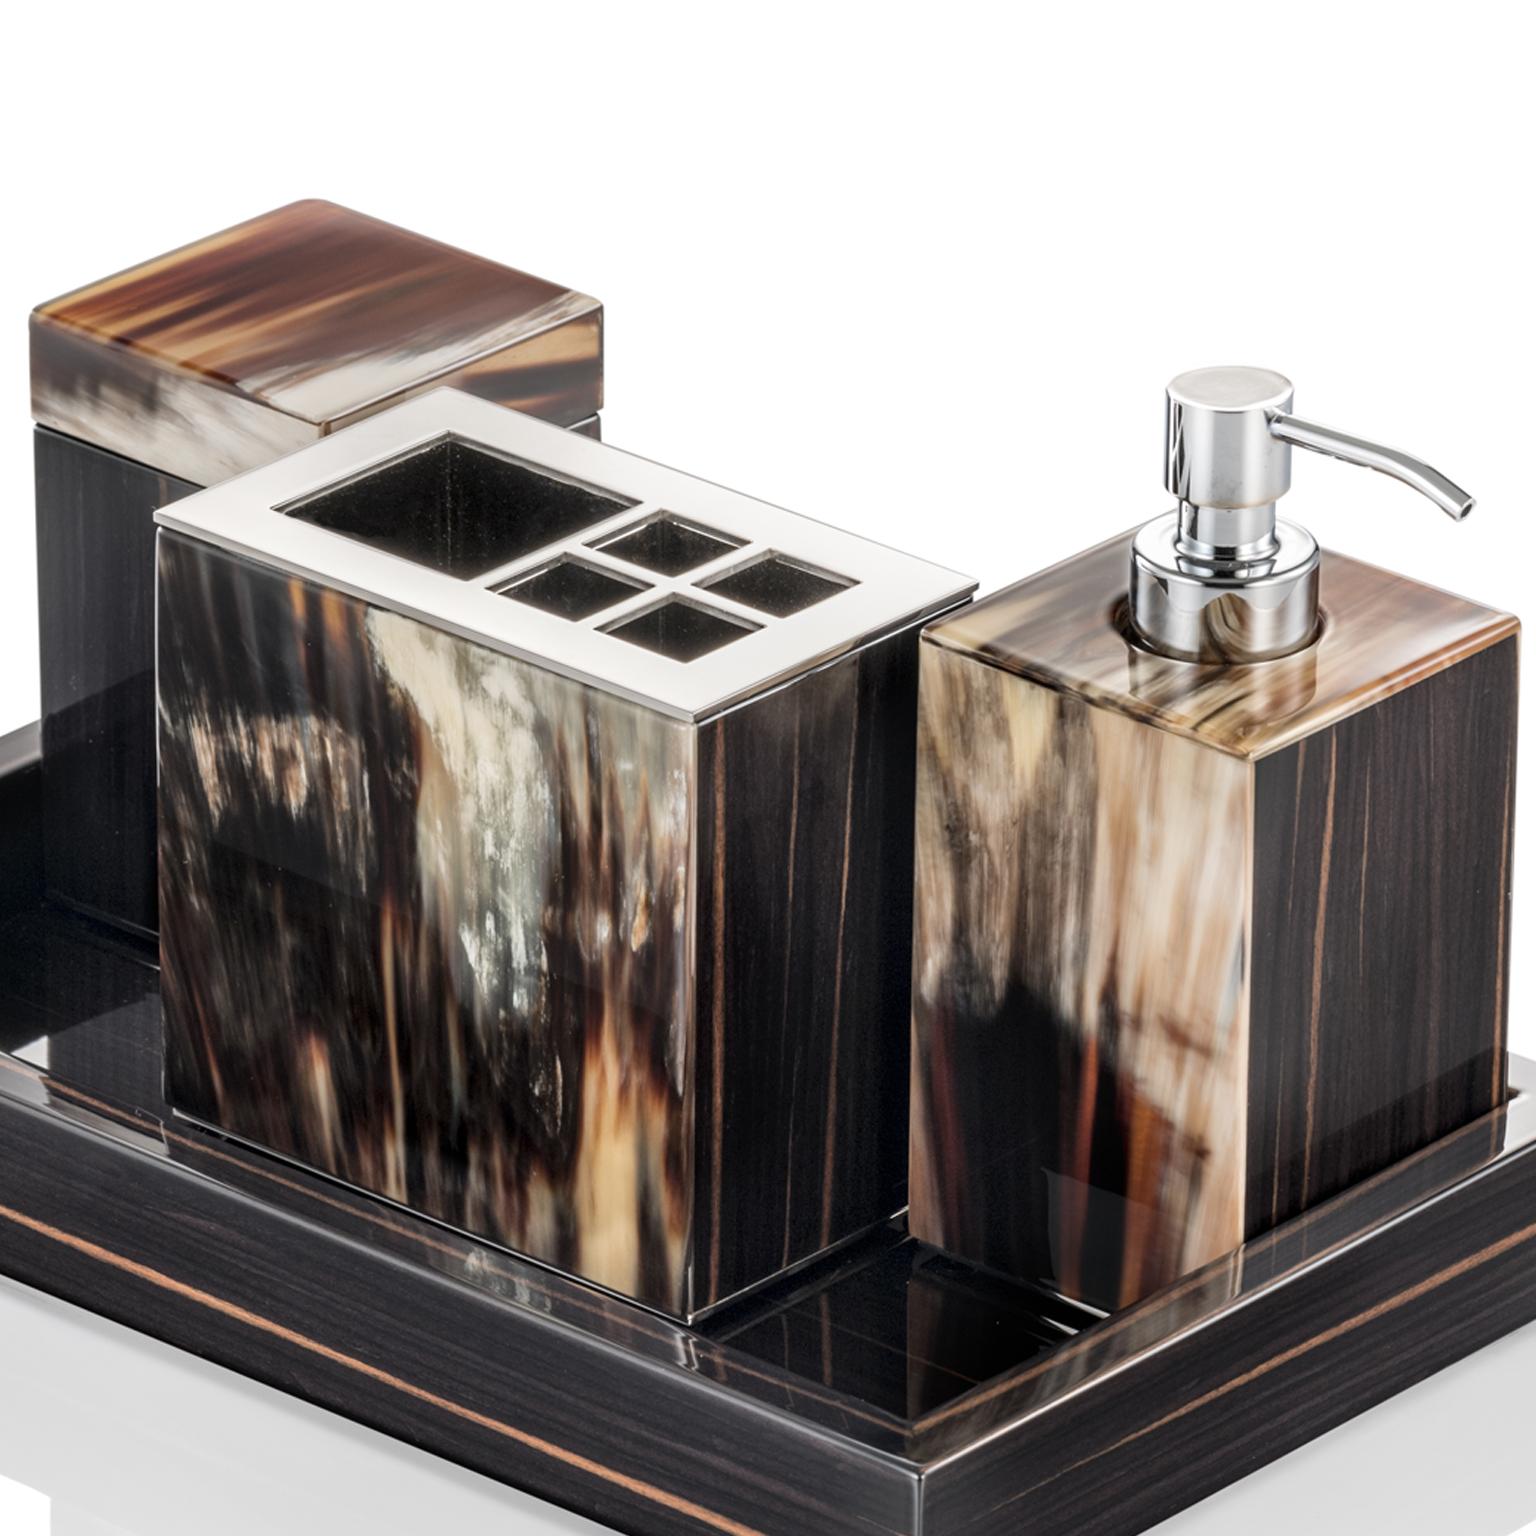 Minimalist yet decorative, the Iris bath set is an must-have complement to an elegant bathroom. Crafted of glossy ebony, the sleek design is embellished by unique inlays in Corno Italiano, boasting dreamy hues. Comprised of a soap dispenser,